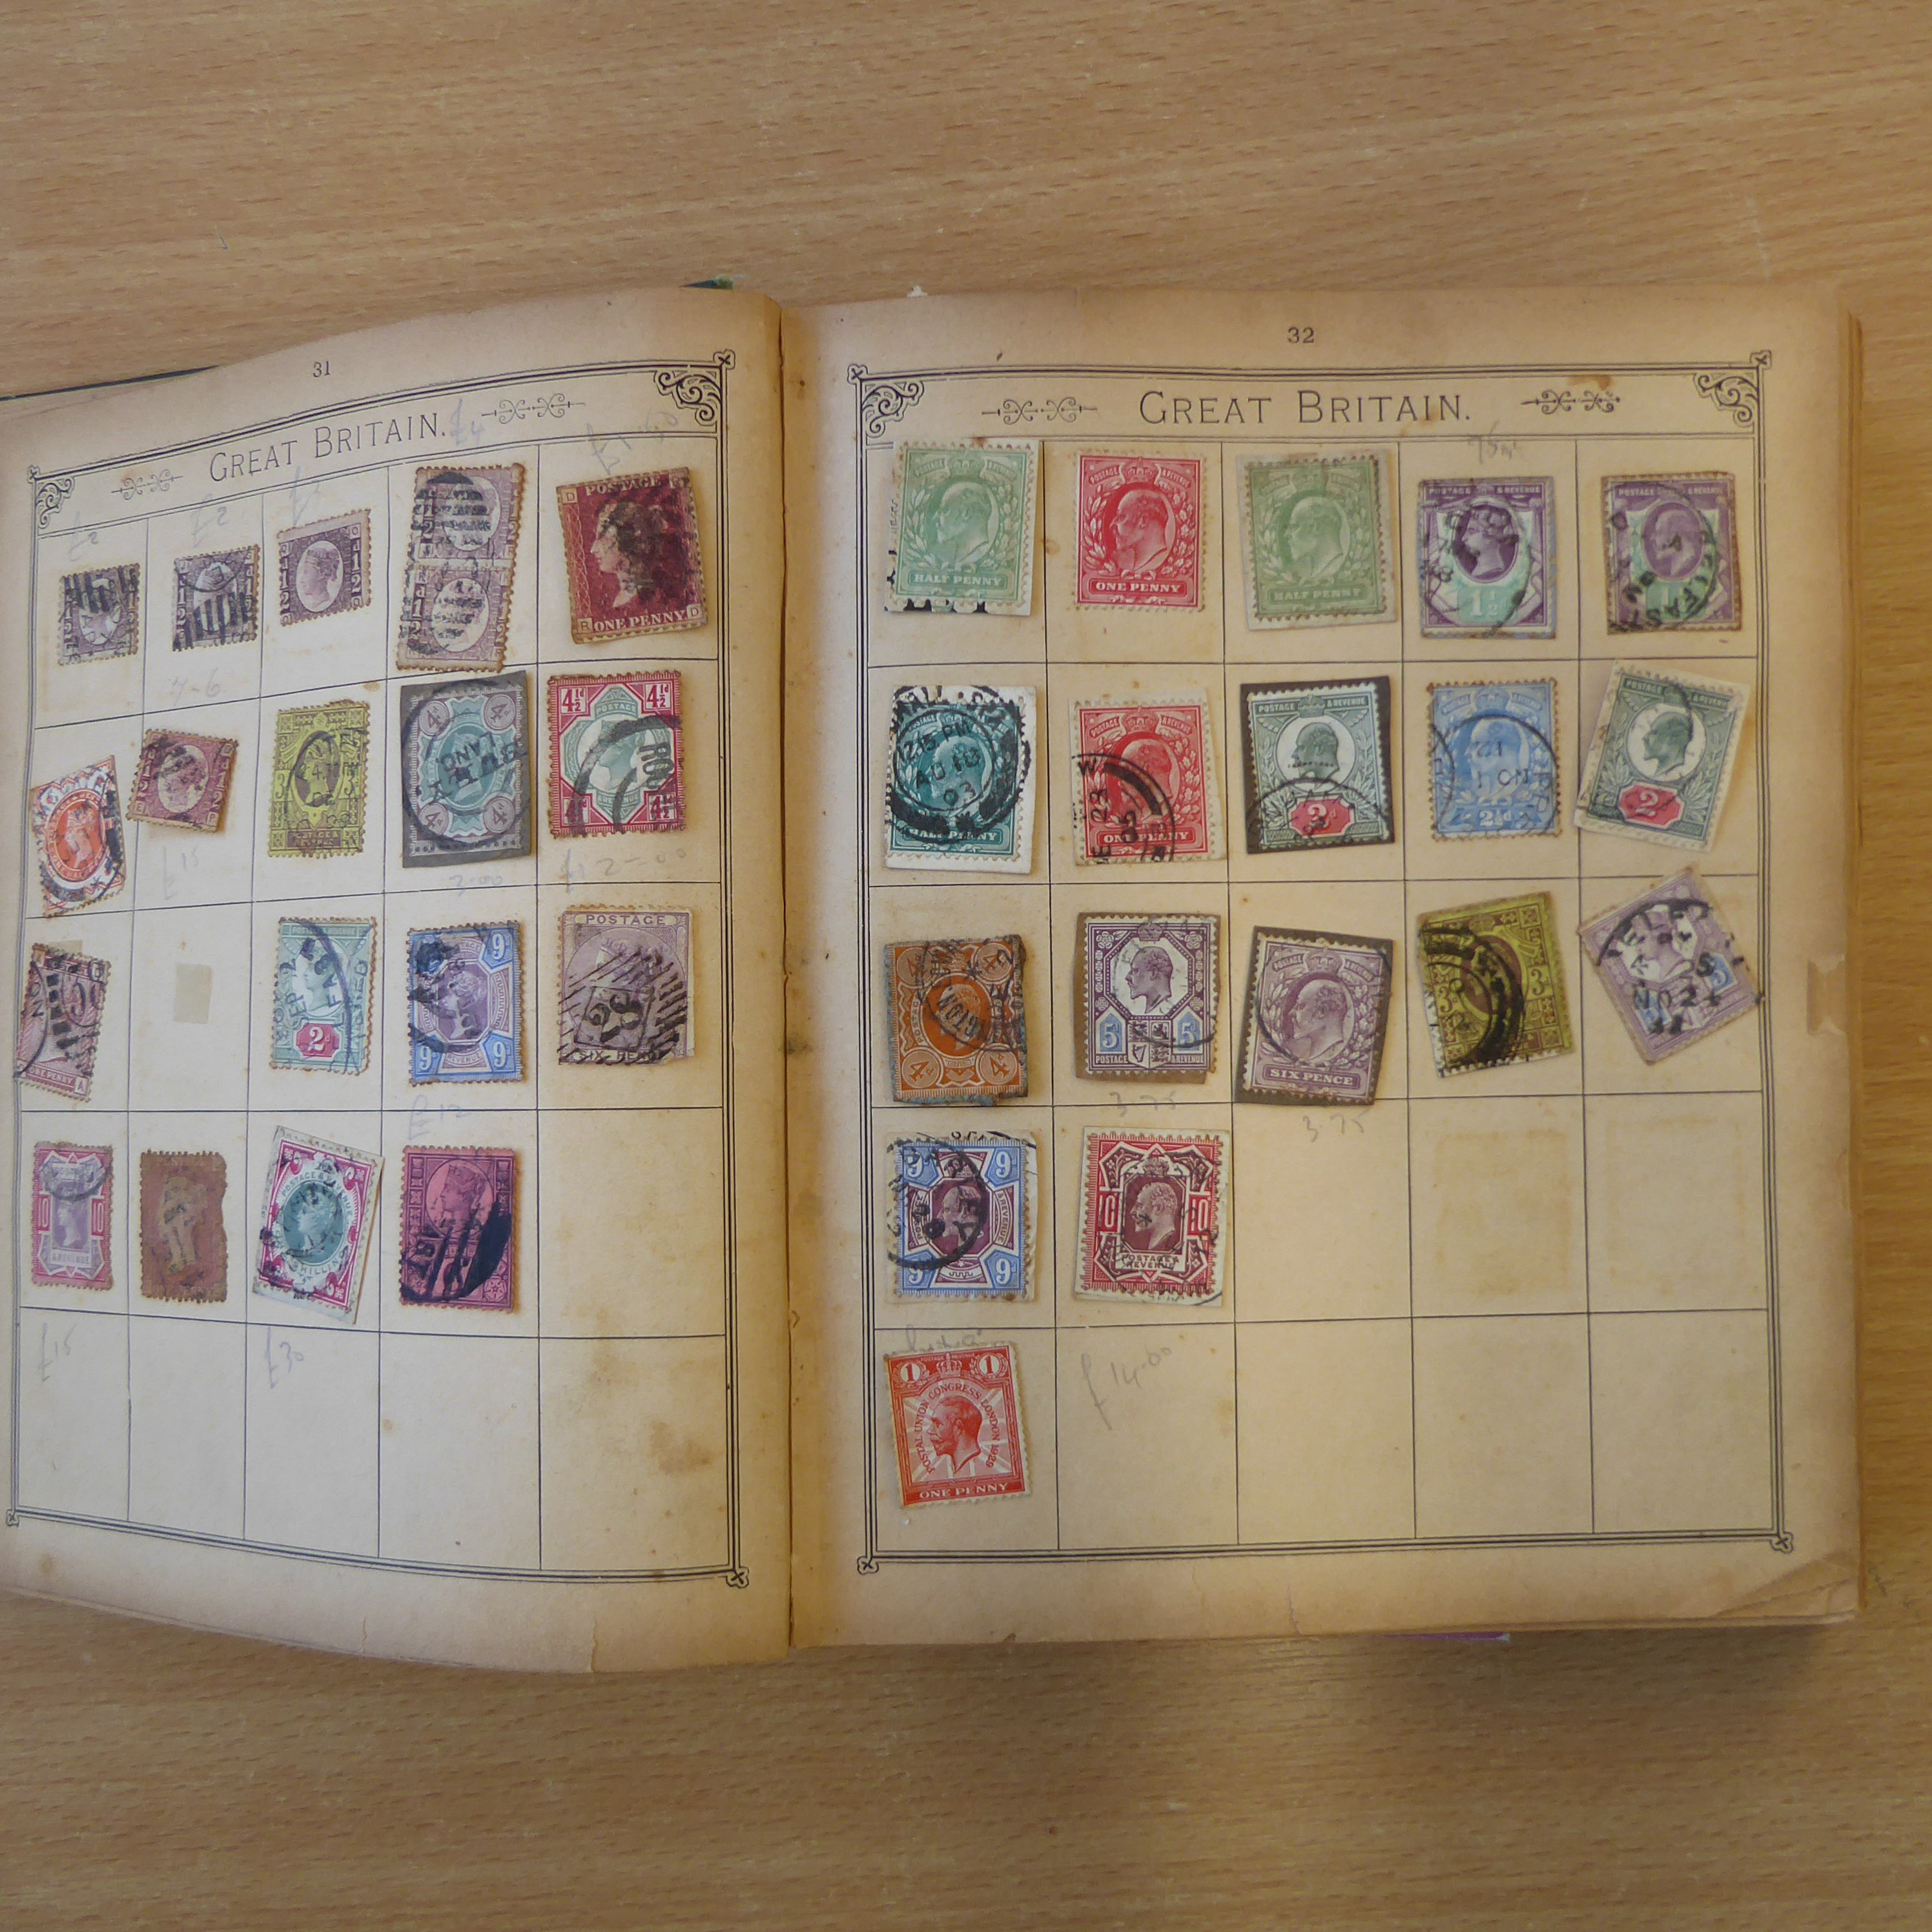 Eight vintage albums, some remaindered world stamps - Image 74 of 109